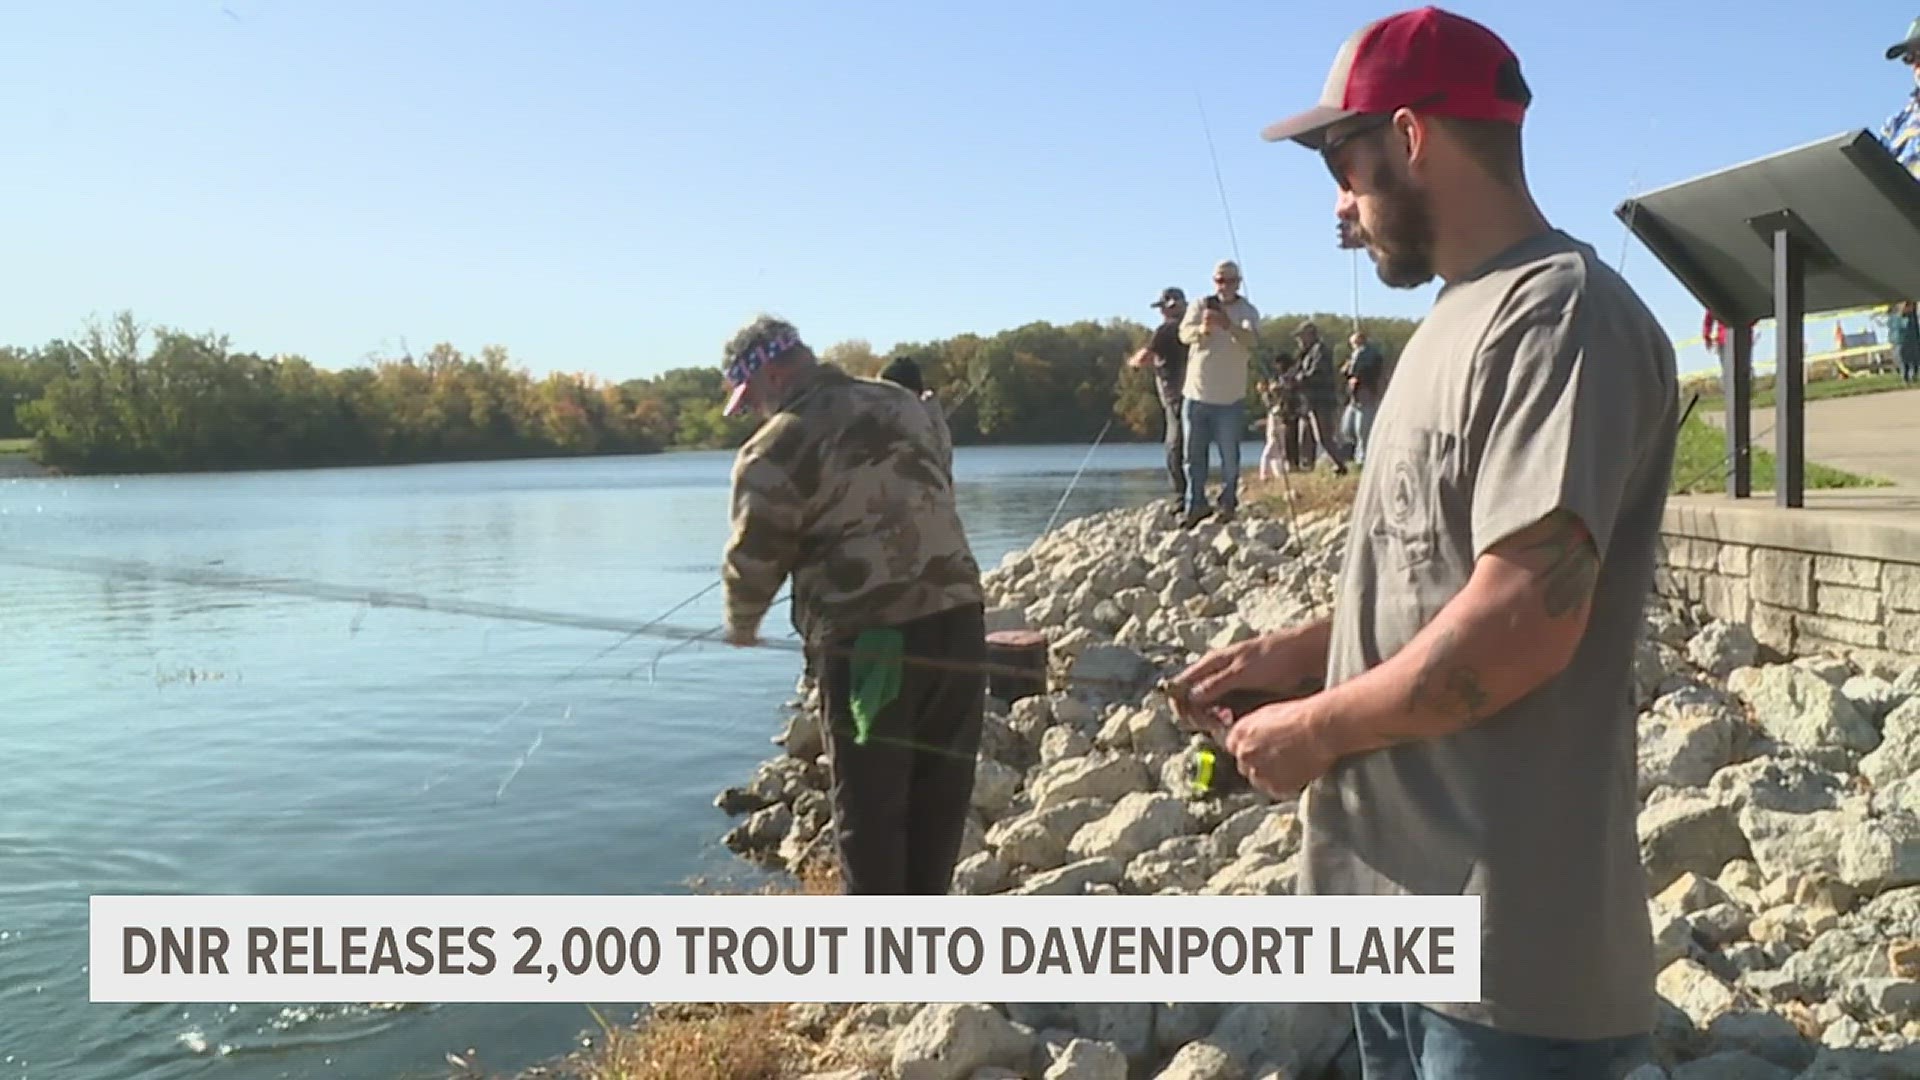 Iowa DNR releases thousands of trout into a Davenport lake to